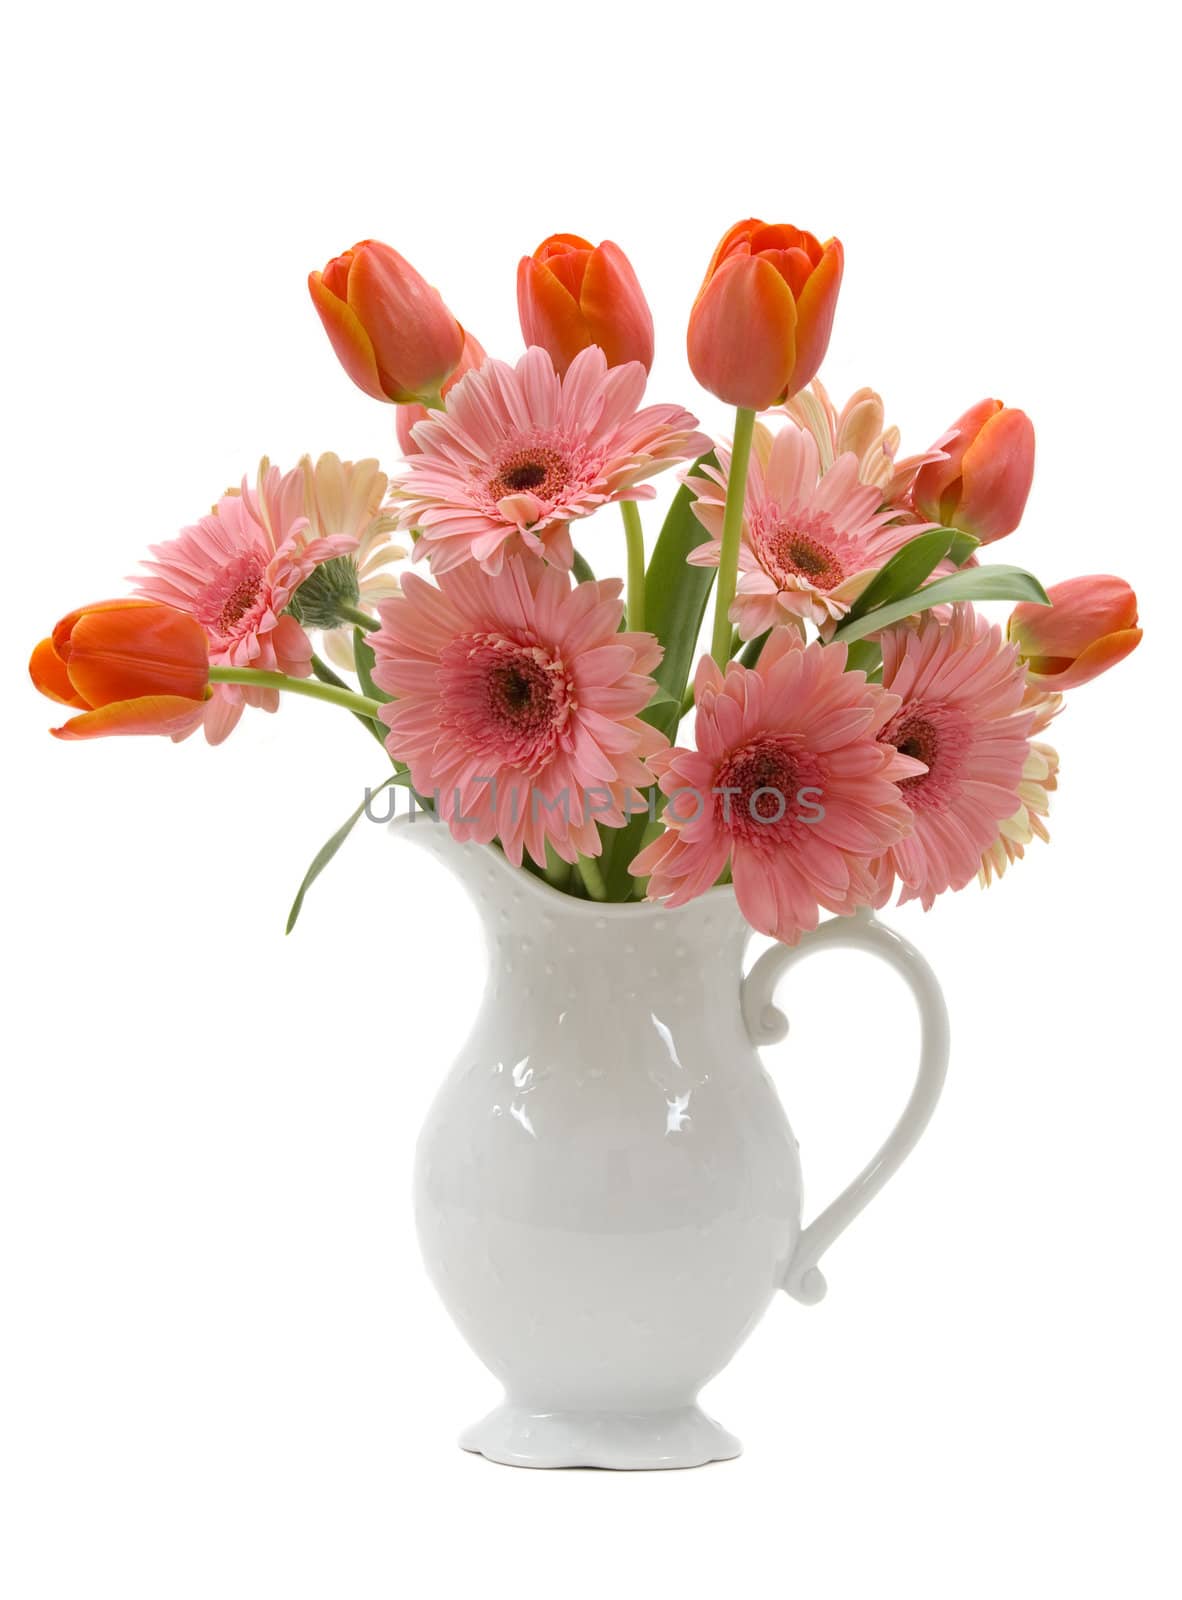 A bouquet of daisy gerberas and tulips in a beautiful pitcher vase